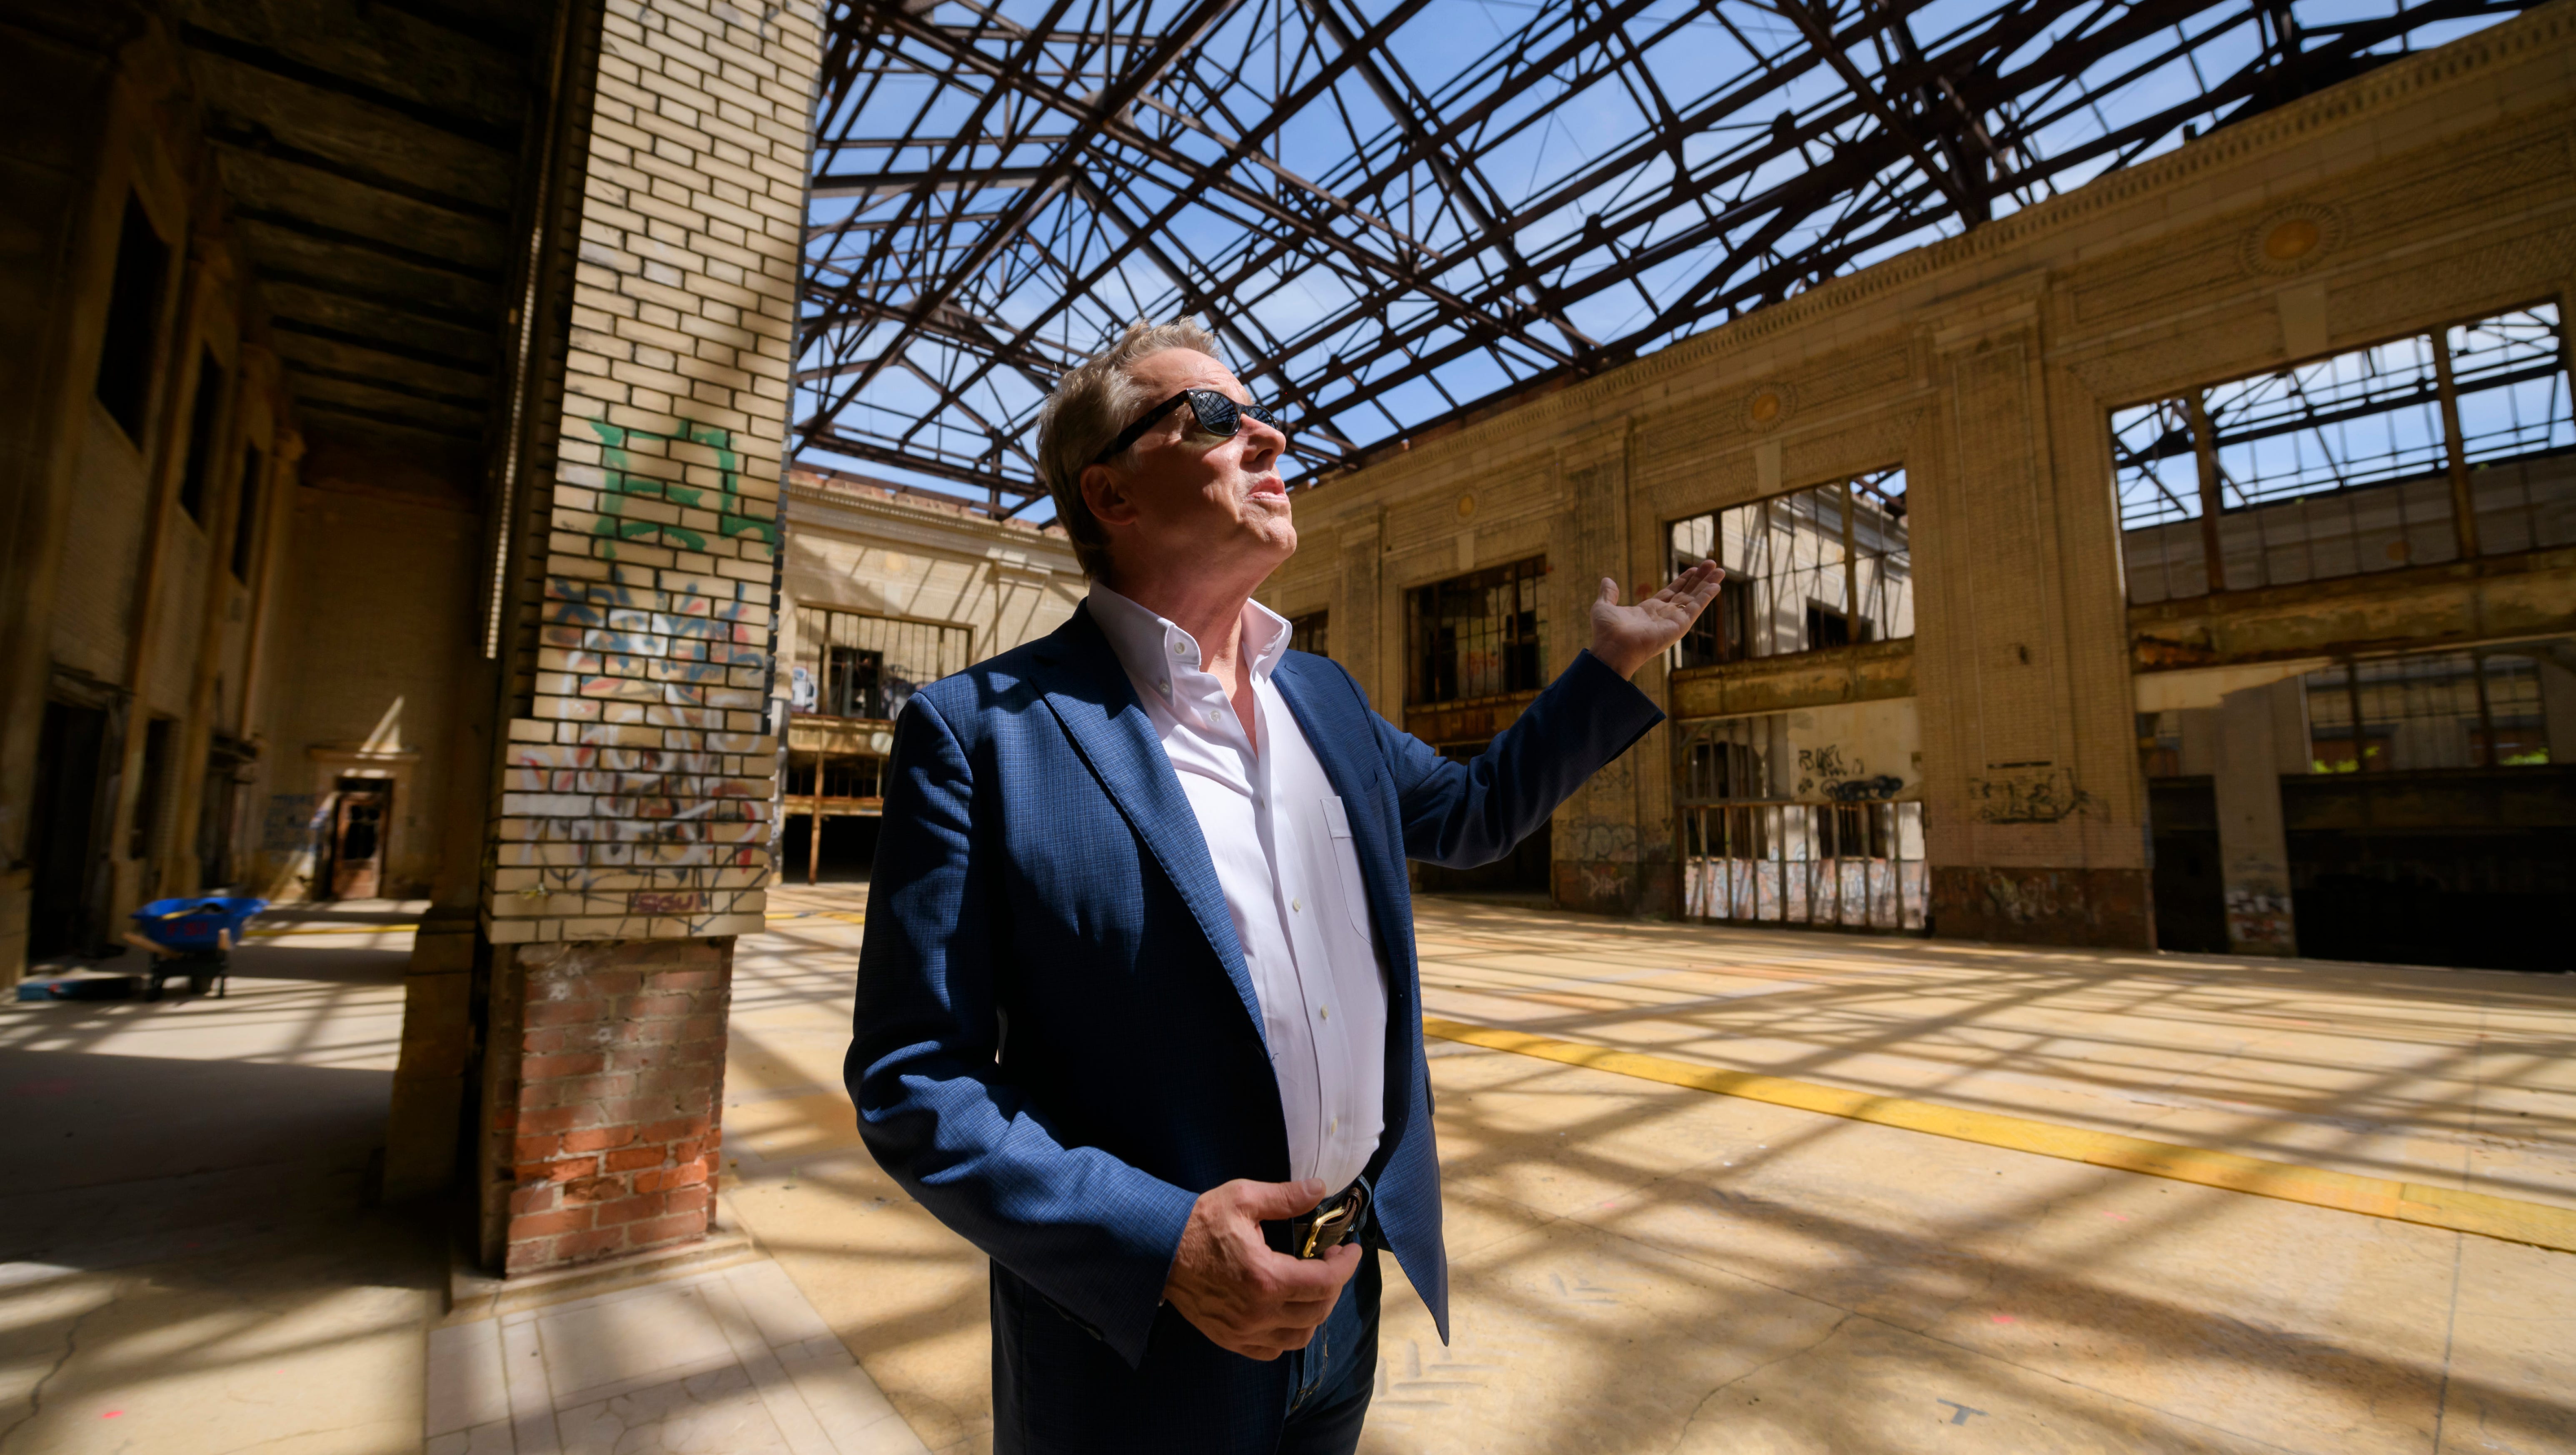 "It's not just a building," Ford Executive Chairman Bill Ford Jr. told The Detroit News in an interview. "It's an amazing building, but it's about all the connections to Detroit, to the suburbs, and the vision around developing the next generation of transportation."